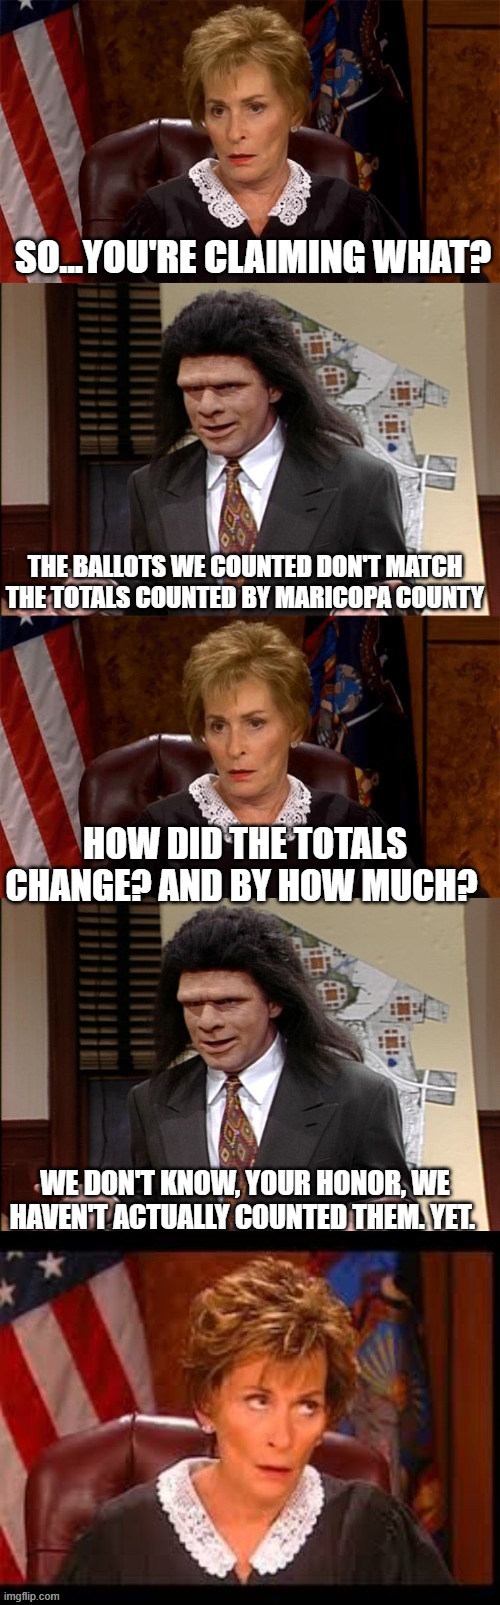 The Fraudit continues | SO...YOU'RE CLAIMING WHAT? THE BALLOTS WE COUNTED DON'T MATCH THE TOTALS COUNTED BY MARICOPA COUNTY; HOW DID THE TOTALS CHANGE? AND BY HOW MUCH? WE DON'T KNOW, YOUR HONOR, WE HAVEN'T ACTUALLY COUNTED THEM. YET. | image tagged in judge v lawyer | made w/ Imgflip meme maker